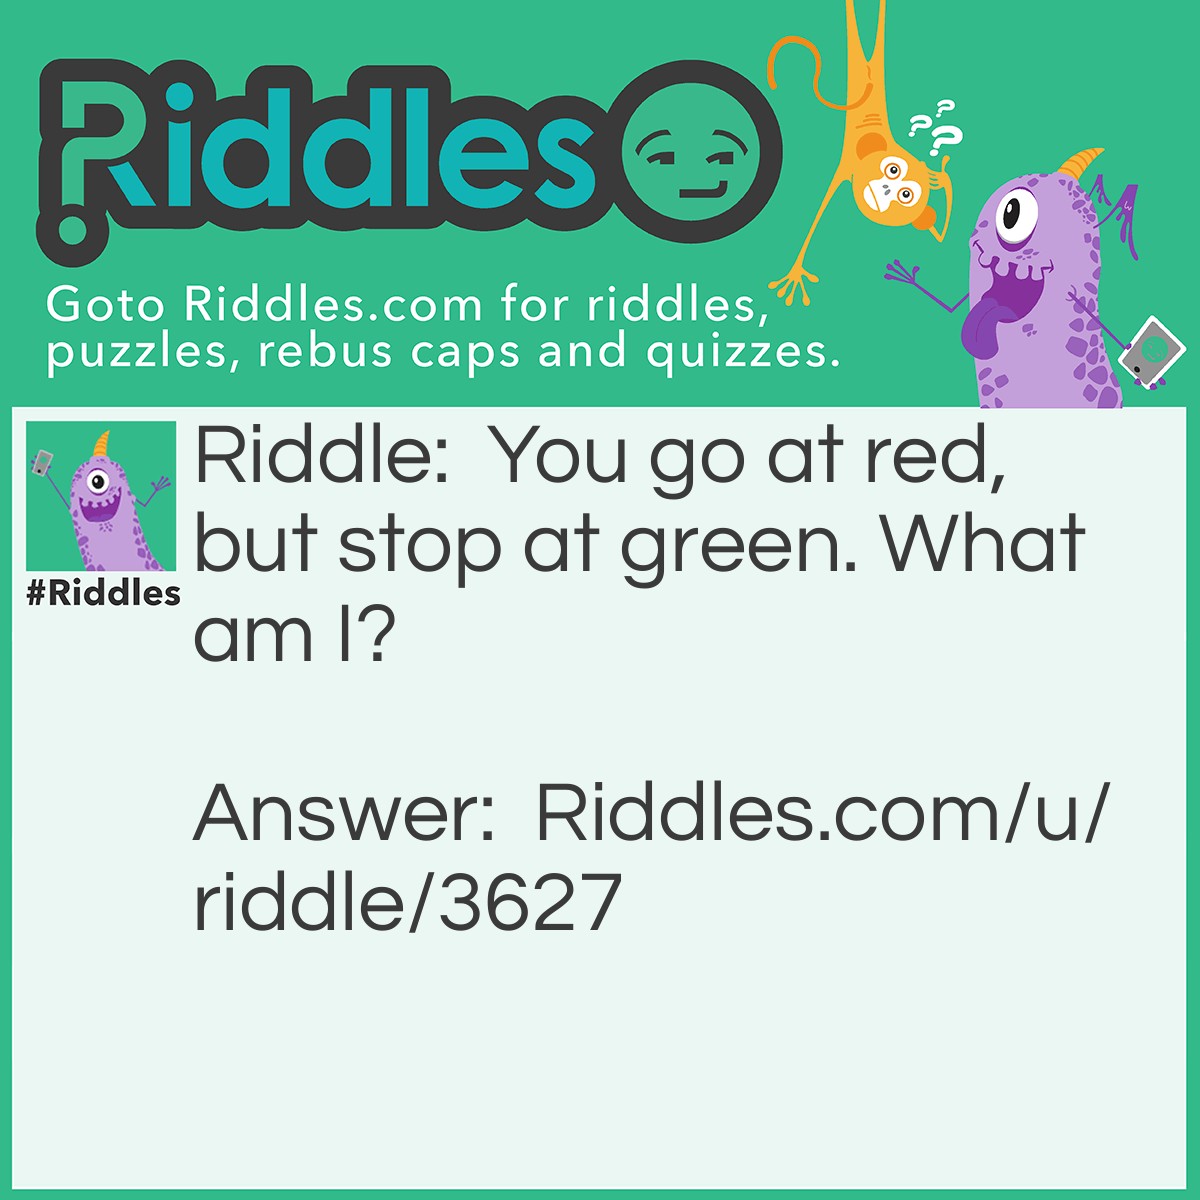 Riddle: You go at red but stop at green. What am I? Answer: Watermelon! You eat the red part, and you stop eating at the green part.